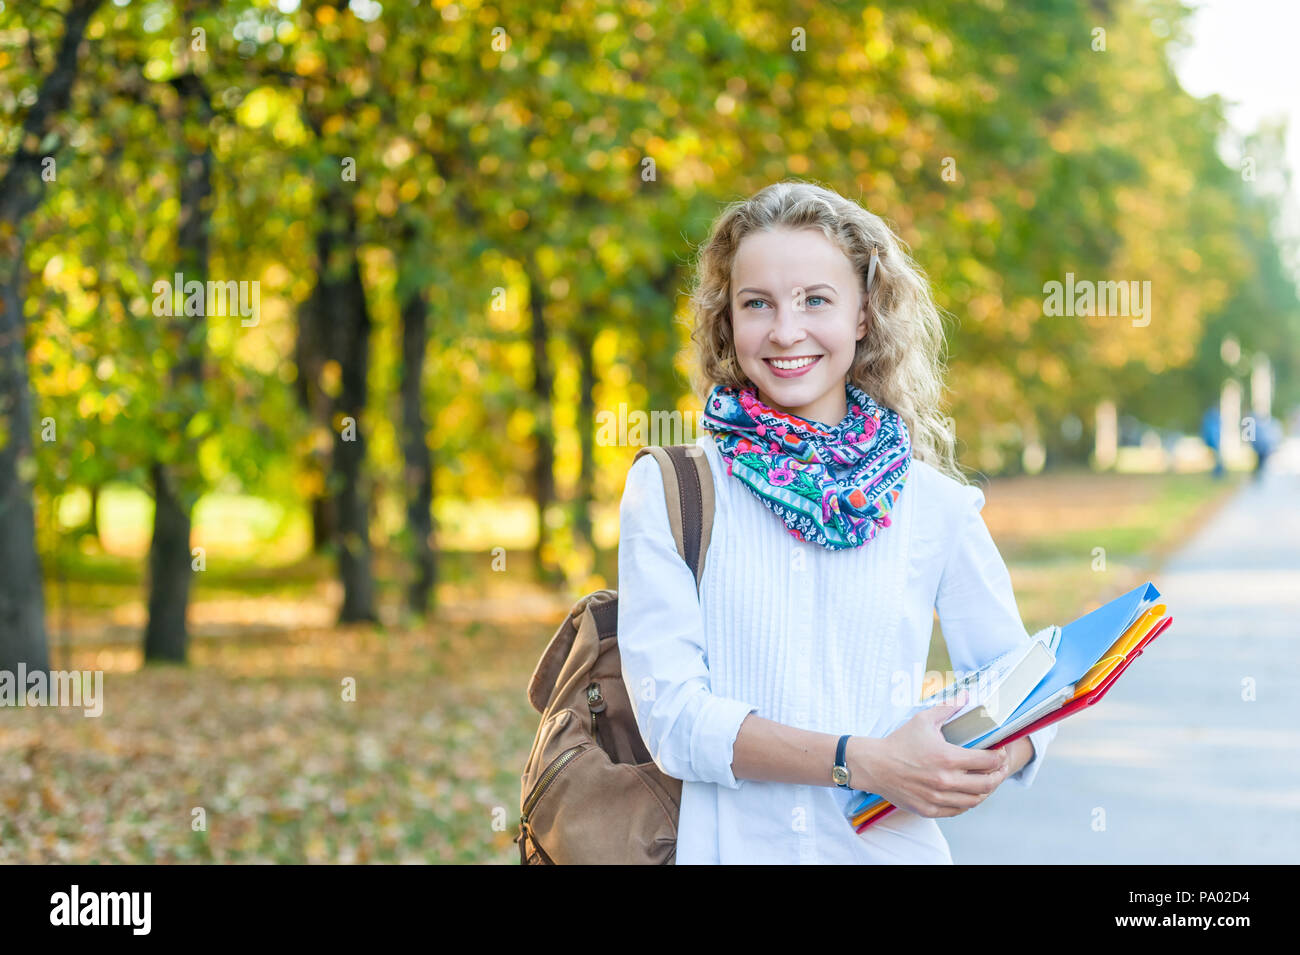 Smiling girl student with folders and books walking in the autumn park Stock Photo